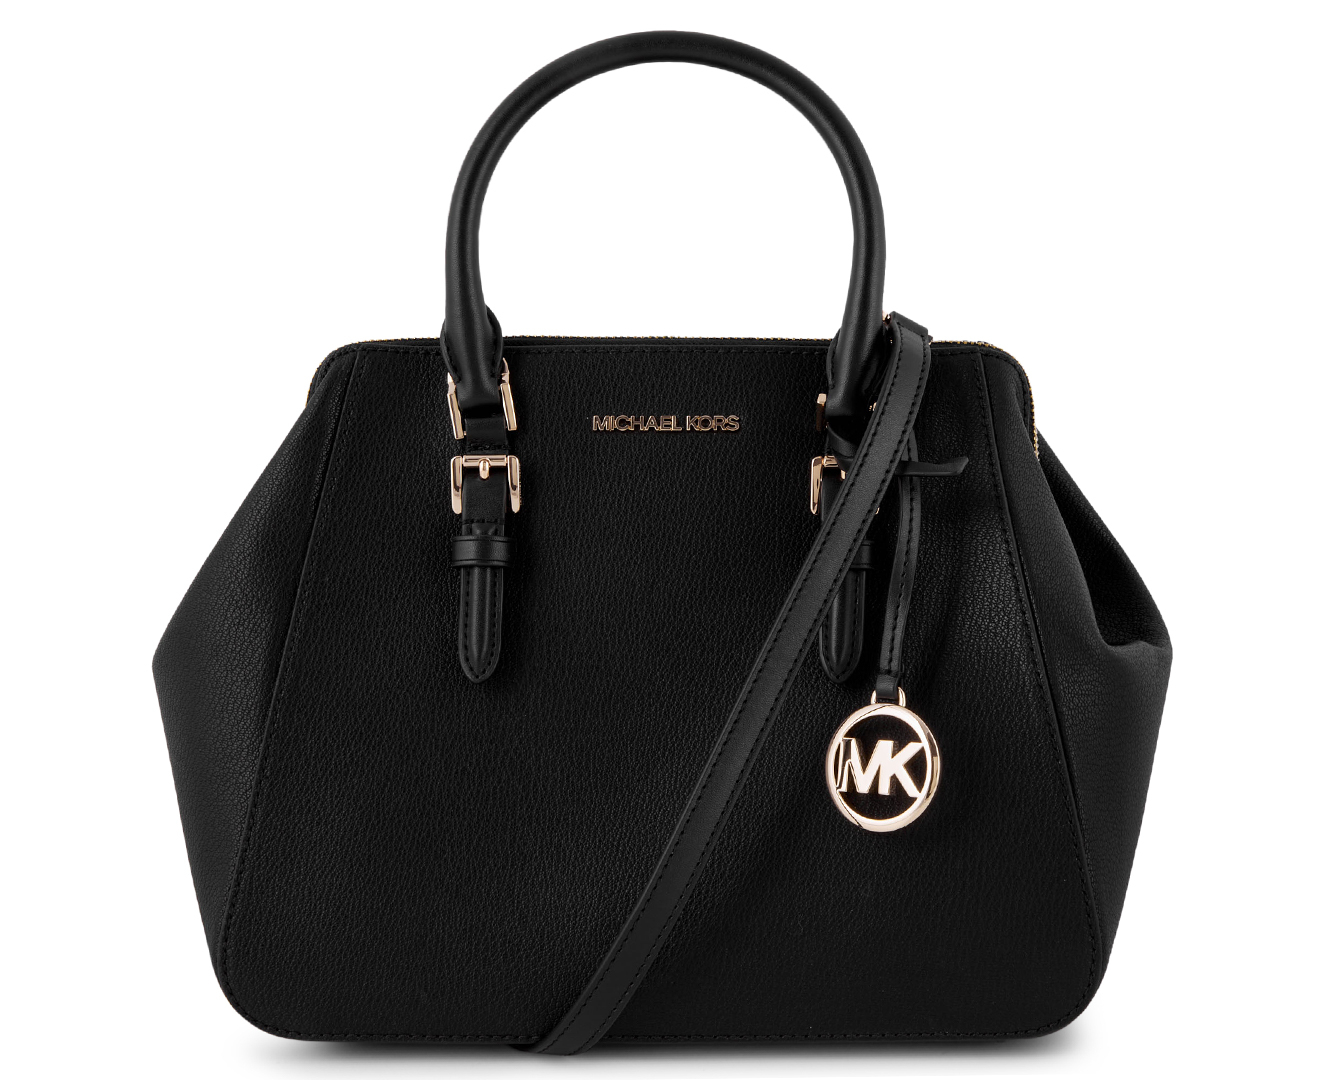 Michael Kors bags shoes jewellery  accessories  fashionette